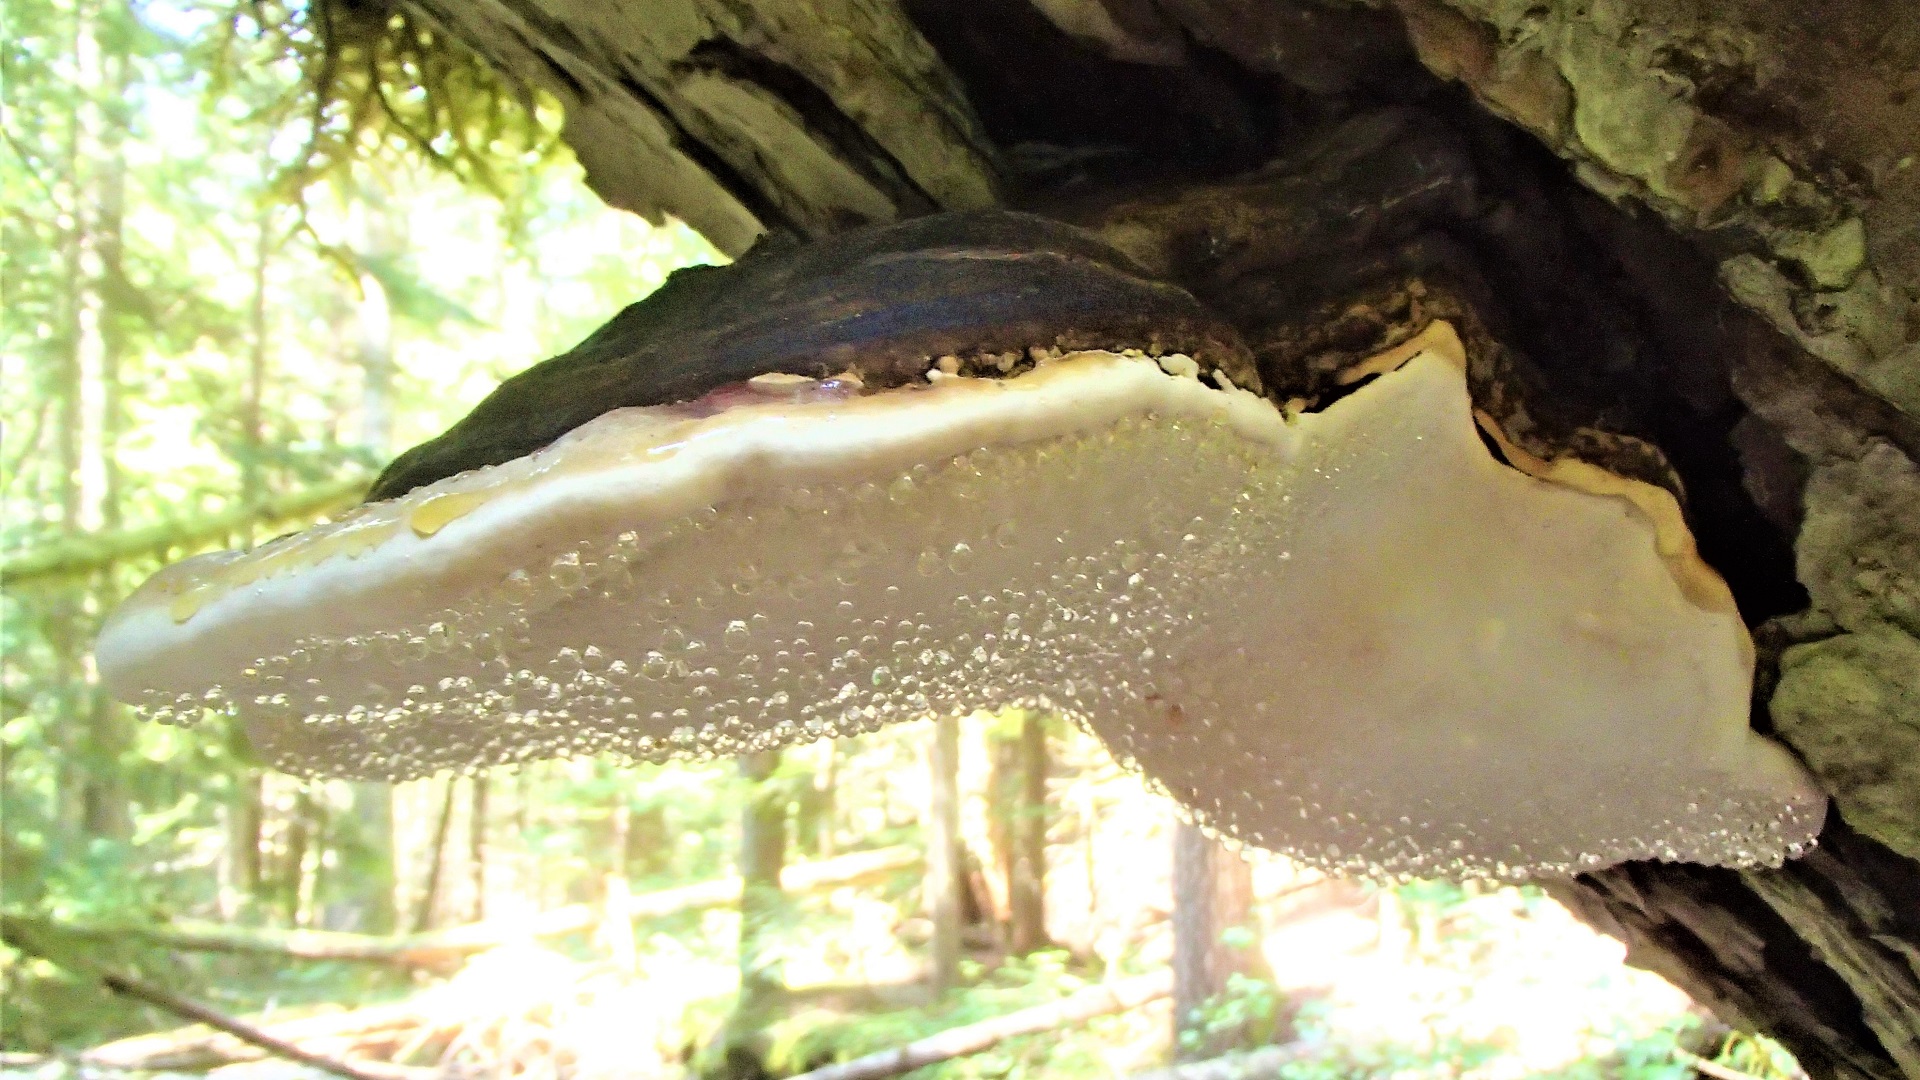 A hard mushroom on the underside of a log with dew drops.